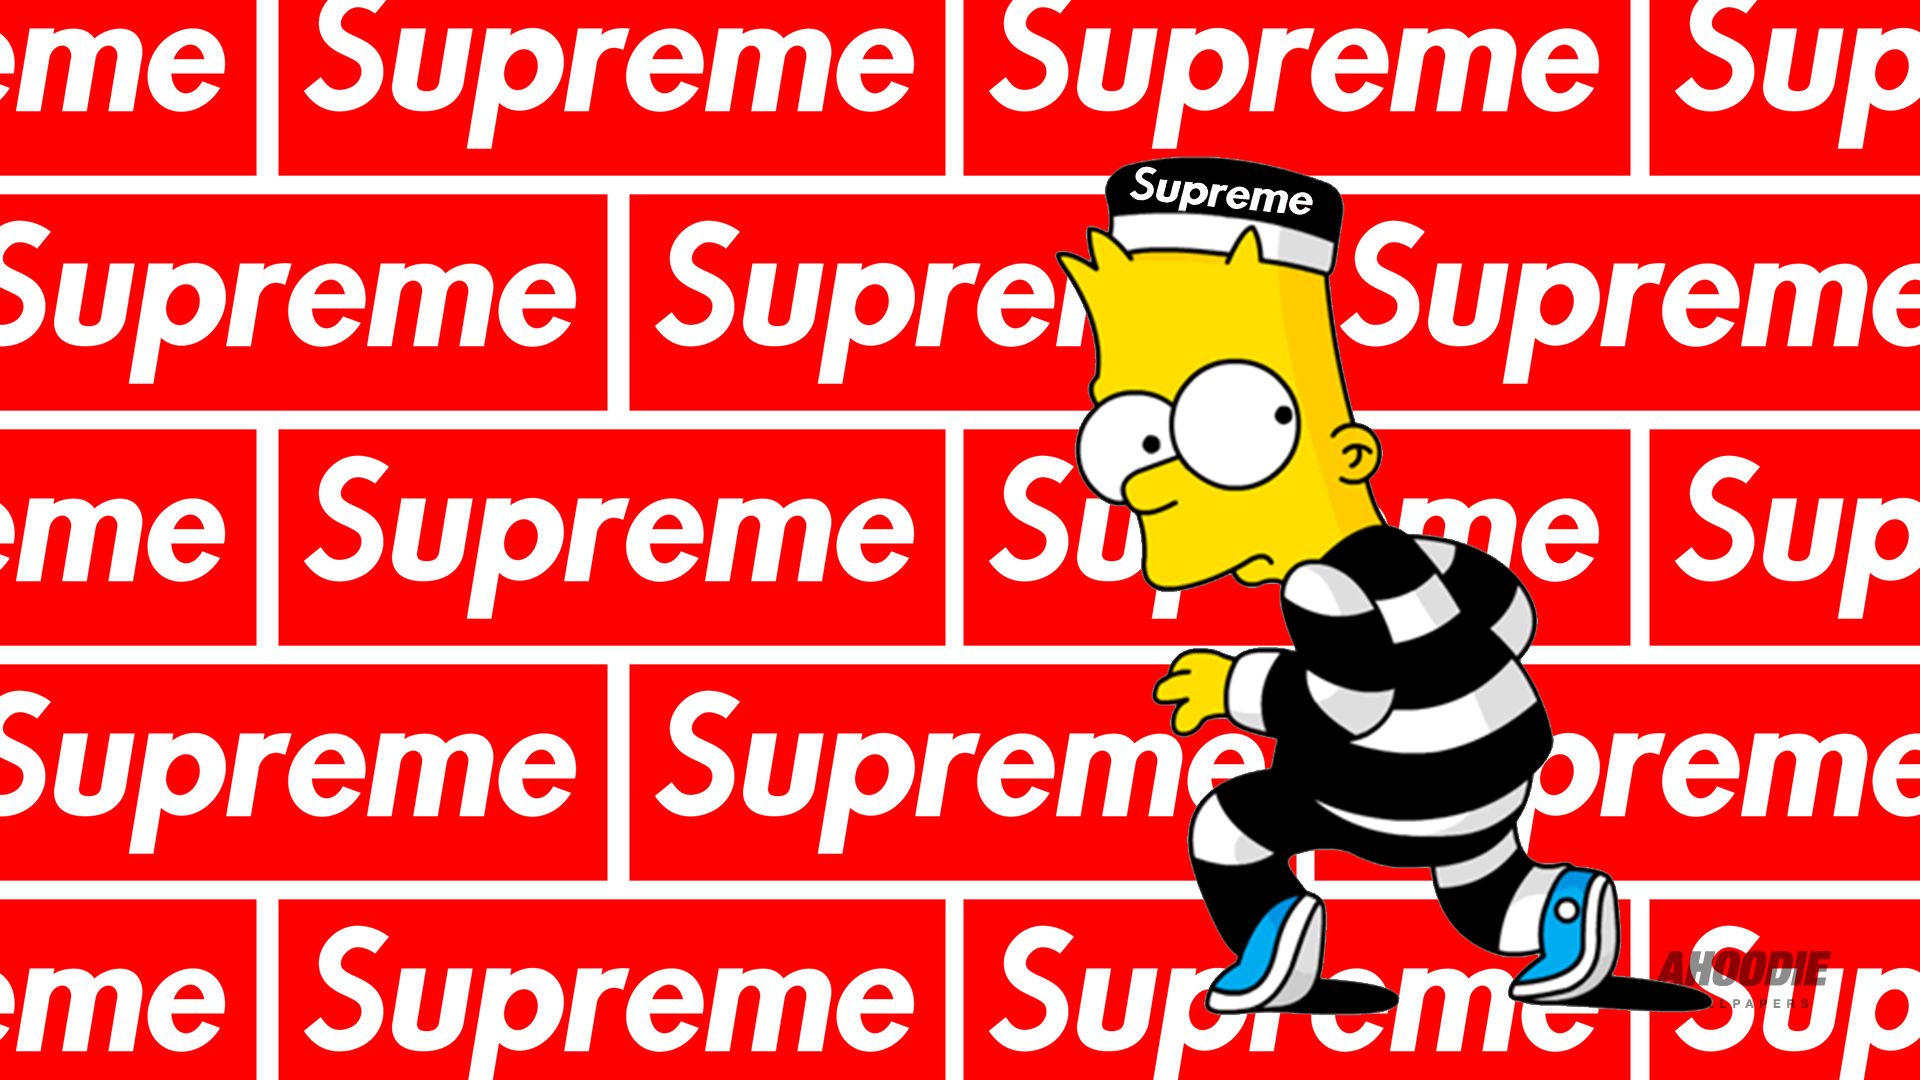 Bart Simpson wearing a black and white striped shirt and a black hat with the word 